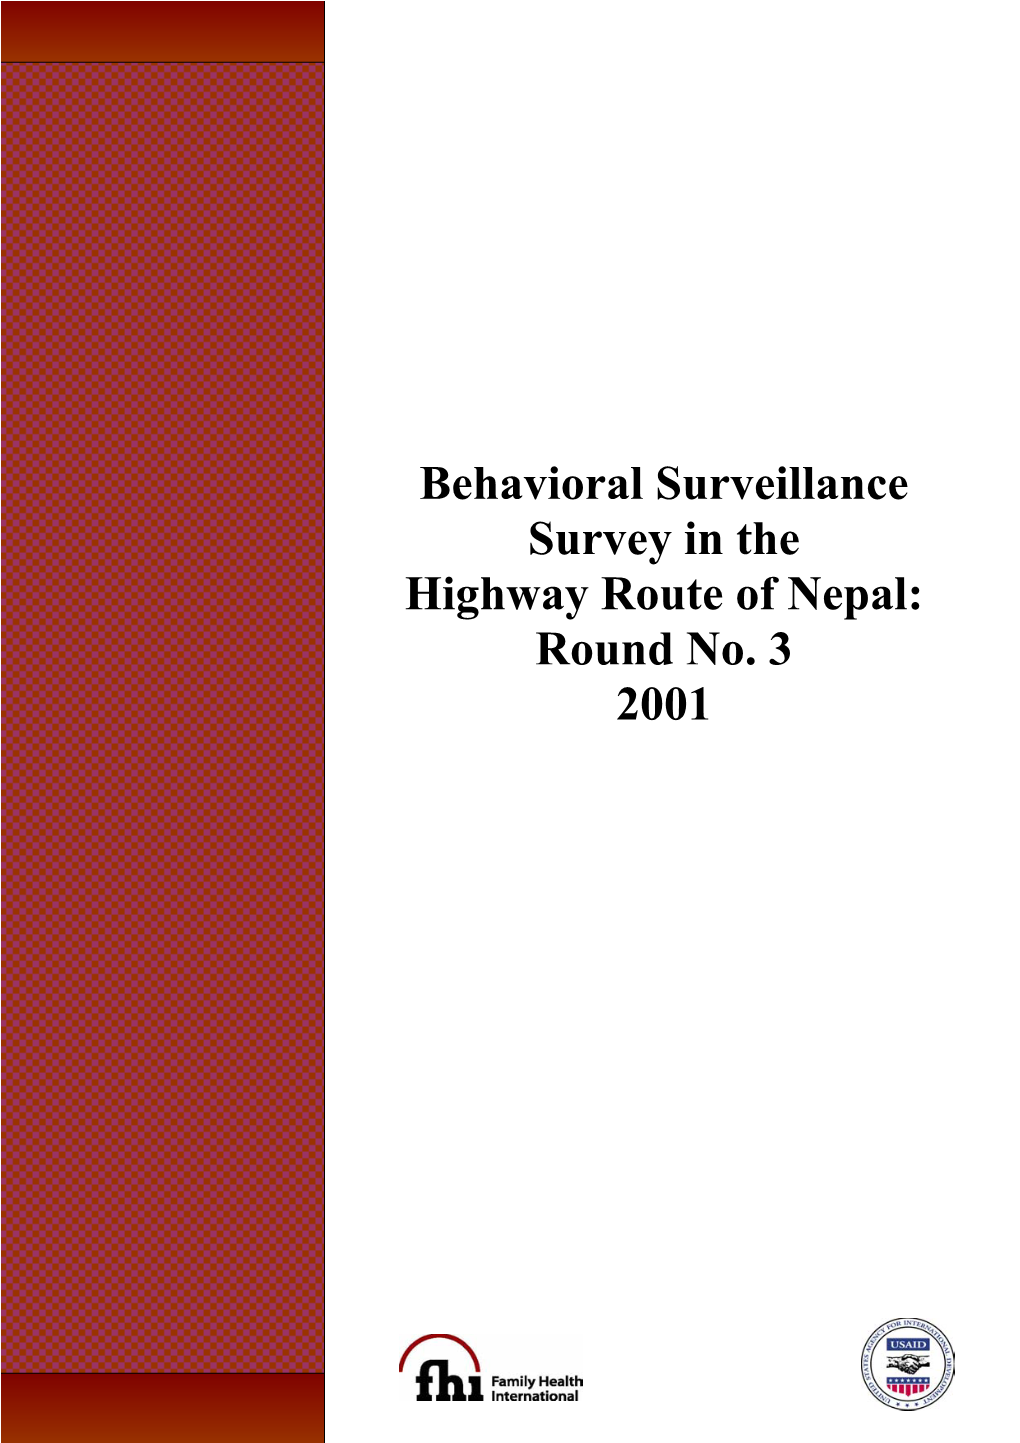 Behavioural Surveillance Survey in the Highway Route of Nepal